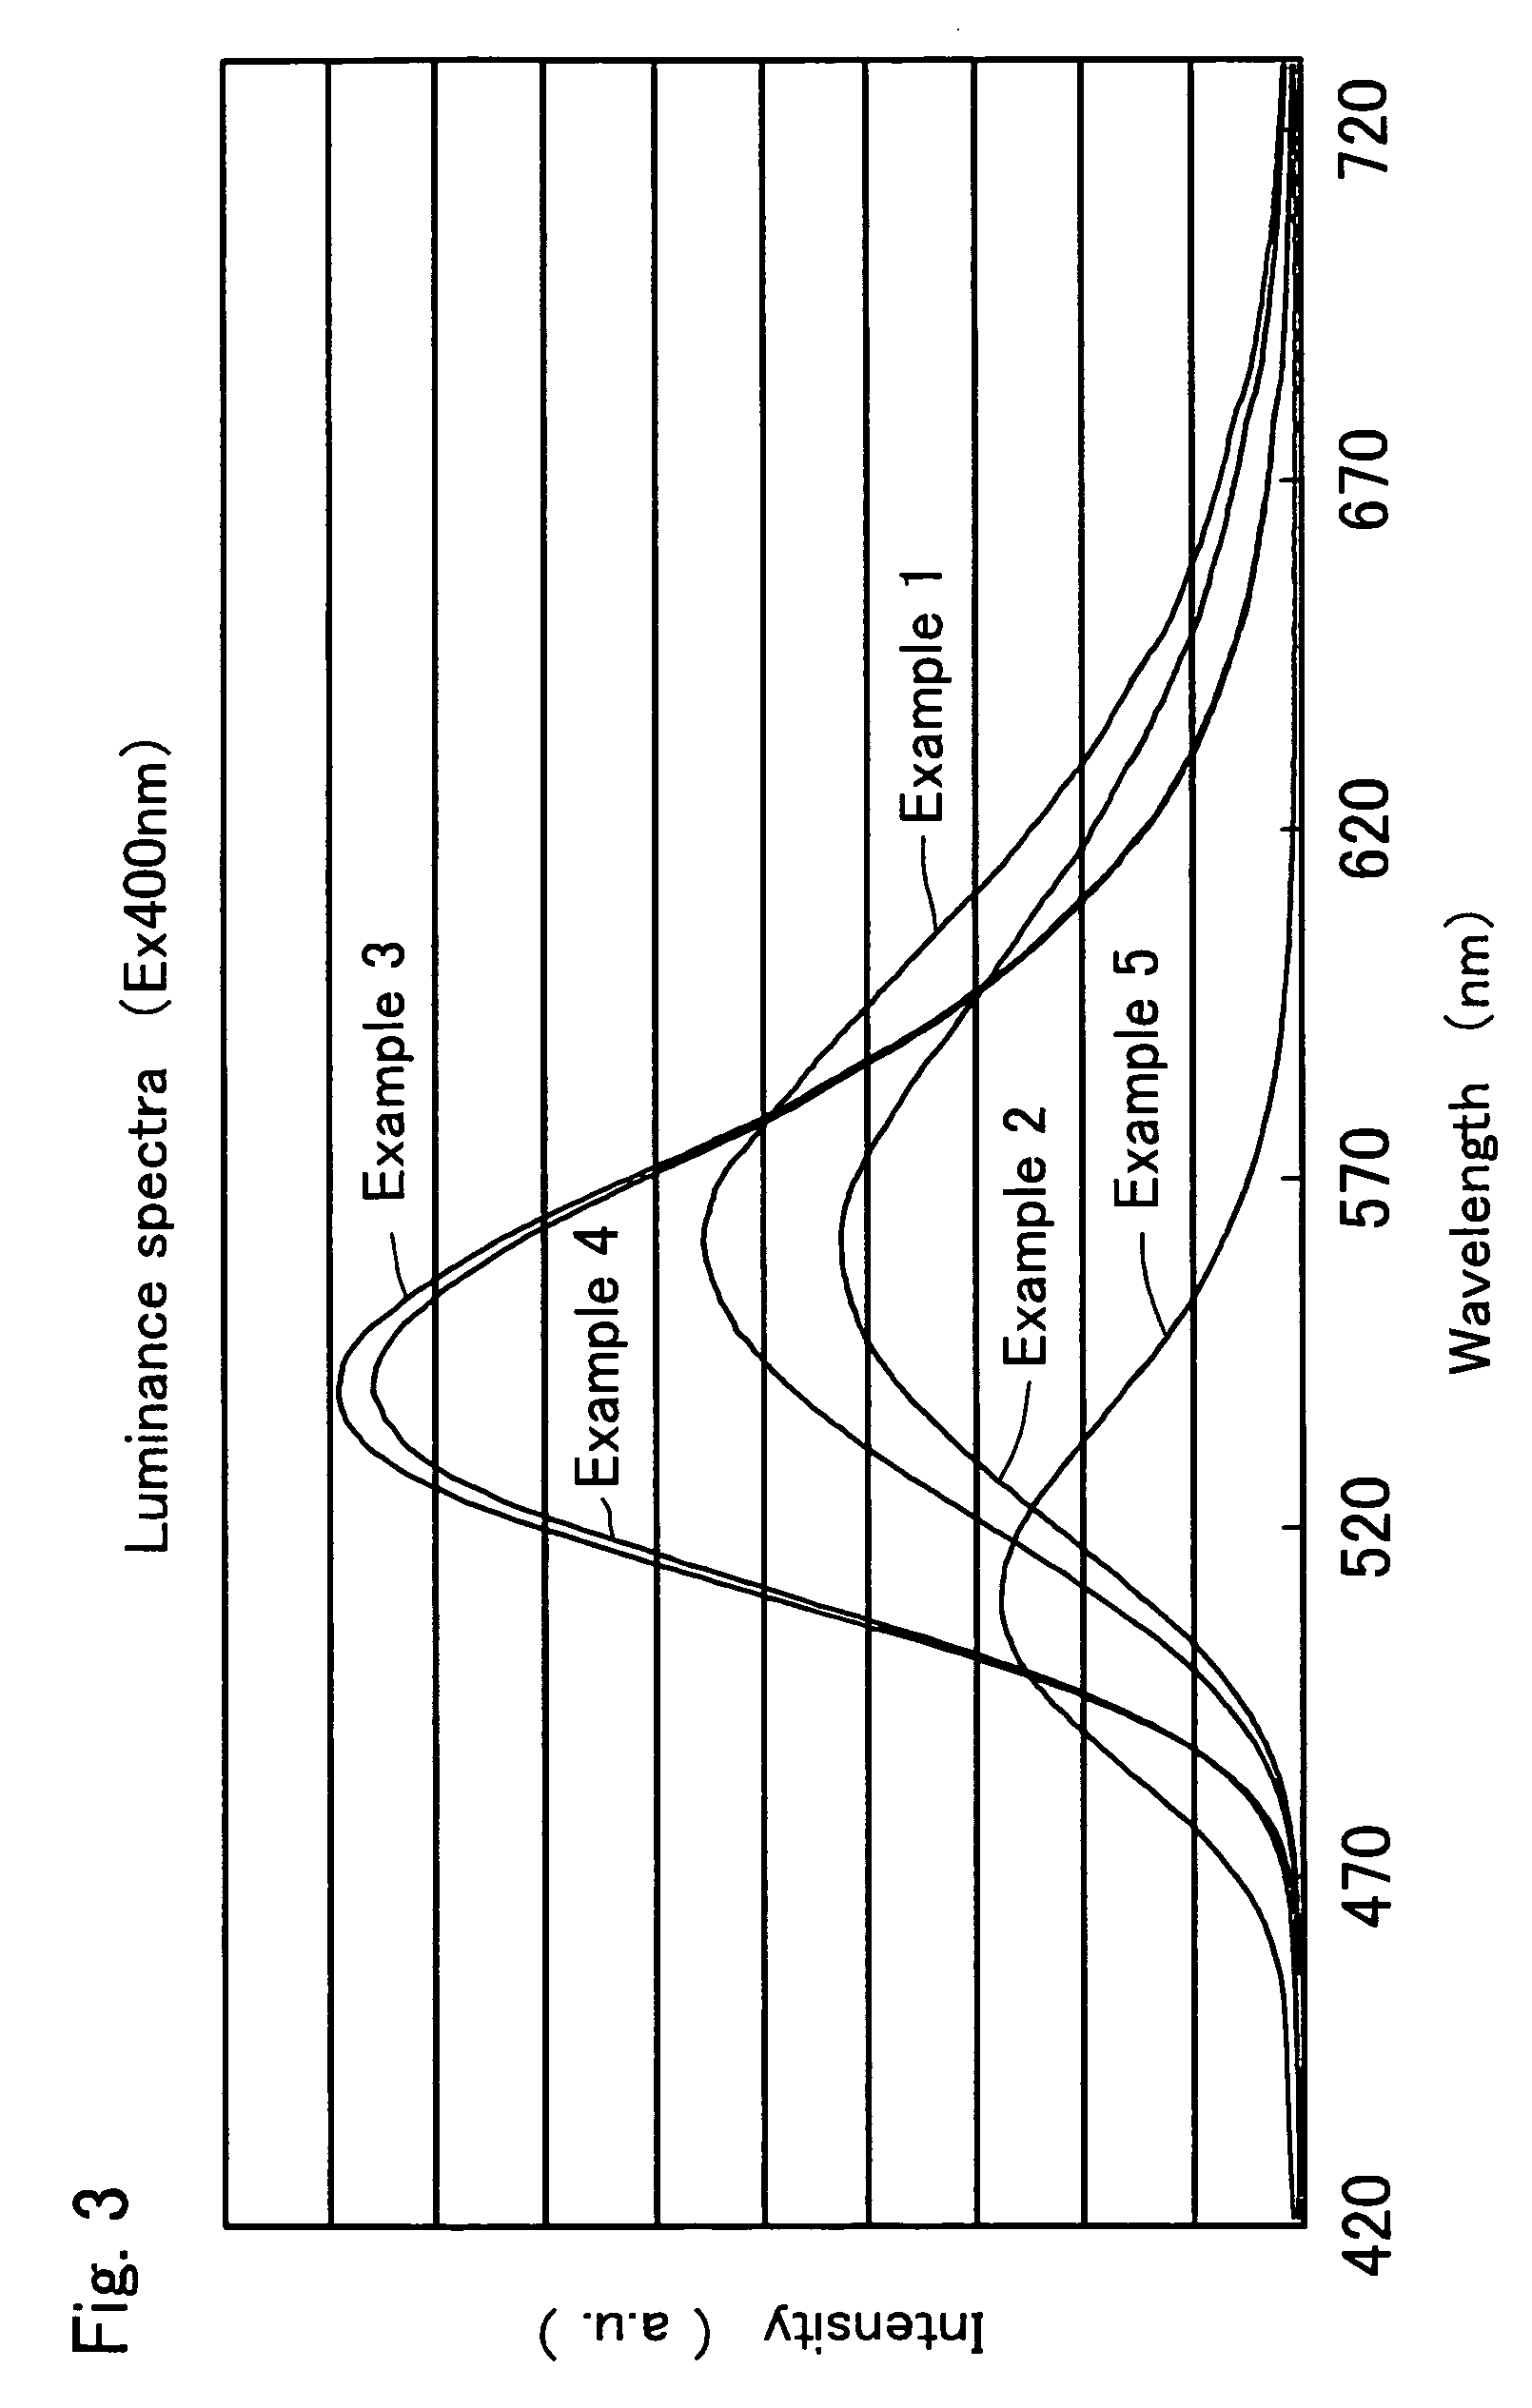 Oxynitride phosphor and production process thereof, and light-emitting device using oxynitride phosphor